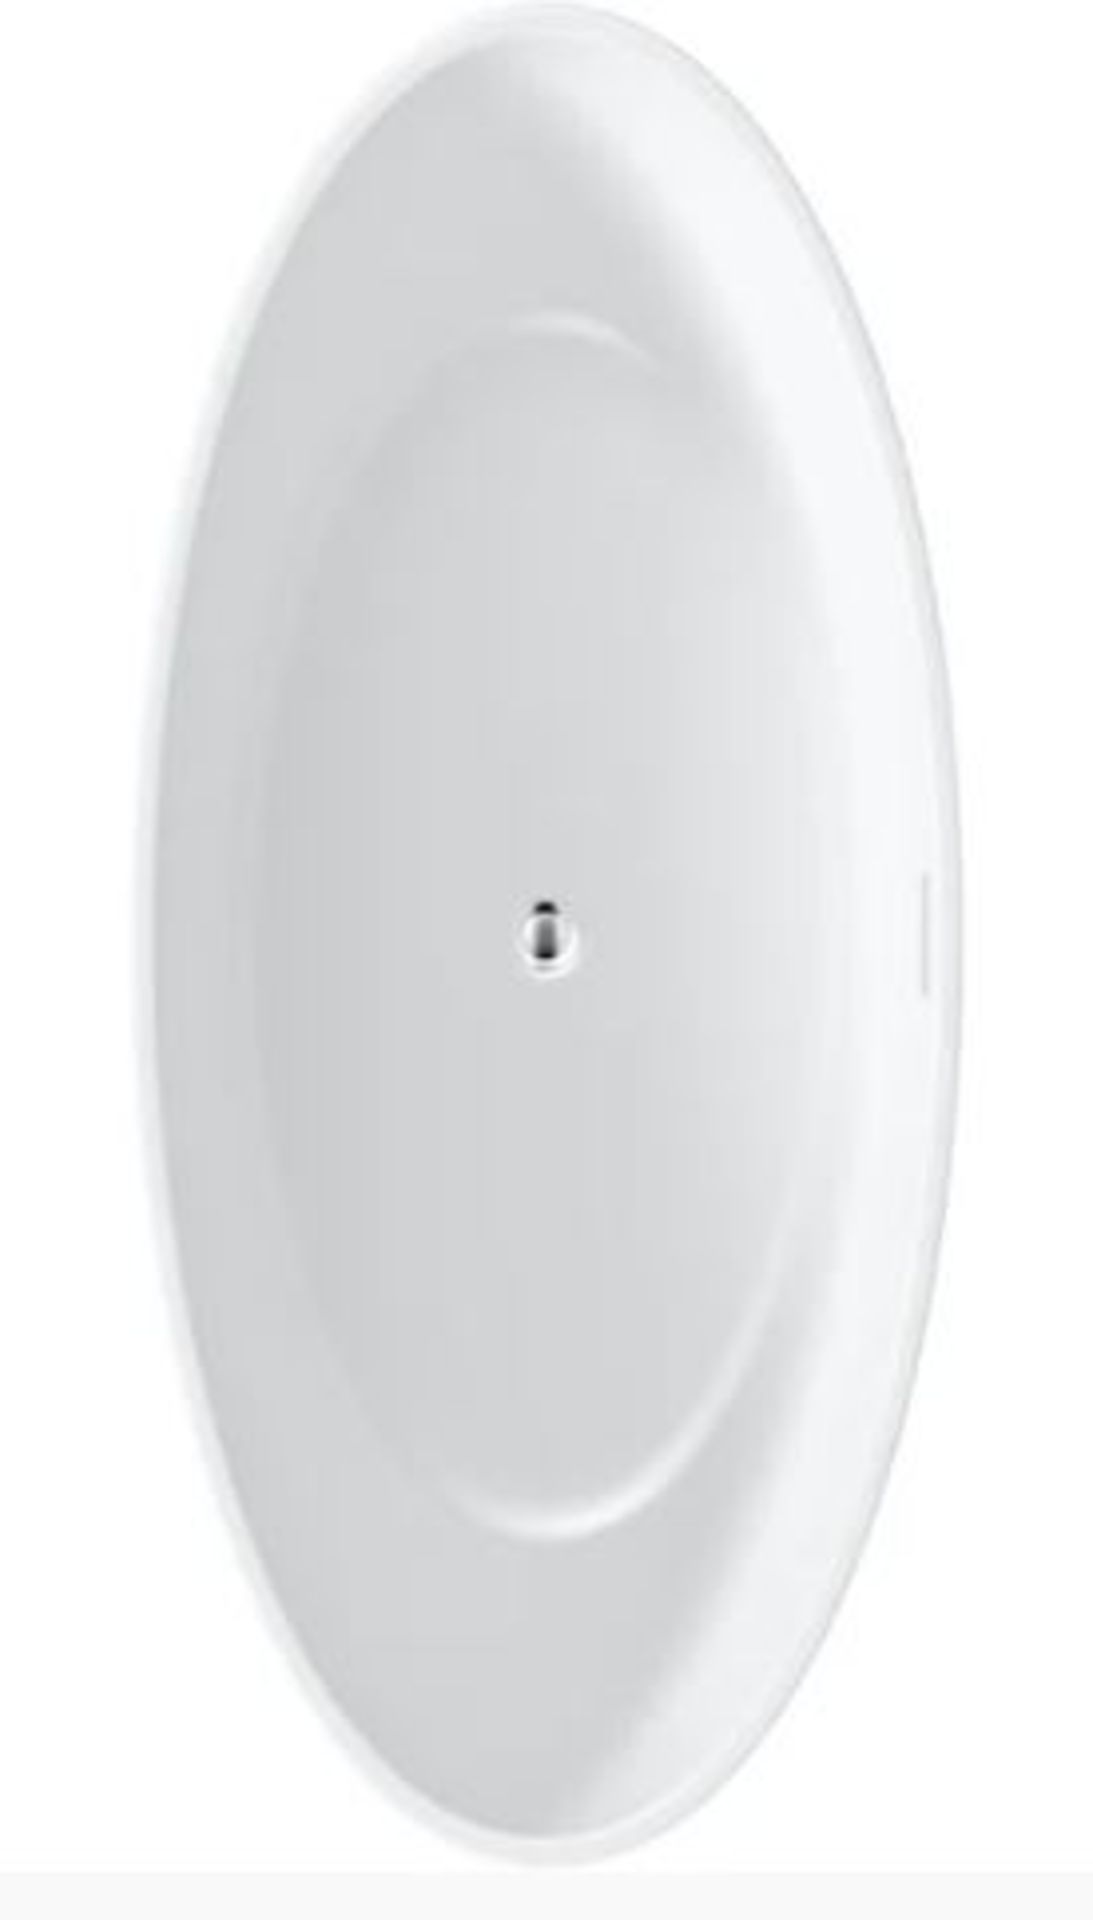 1 X Harrison Freestanding Bath With Waste Mode H600 X W810 X L1790 (rbaif2001) RRP £800 - Image 5 of 7